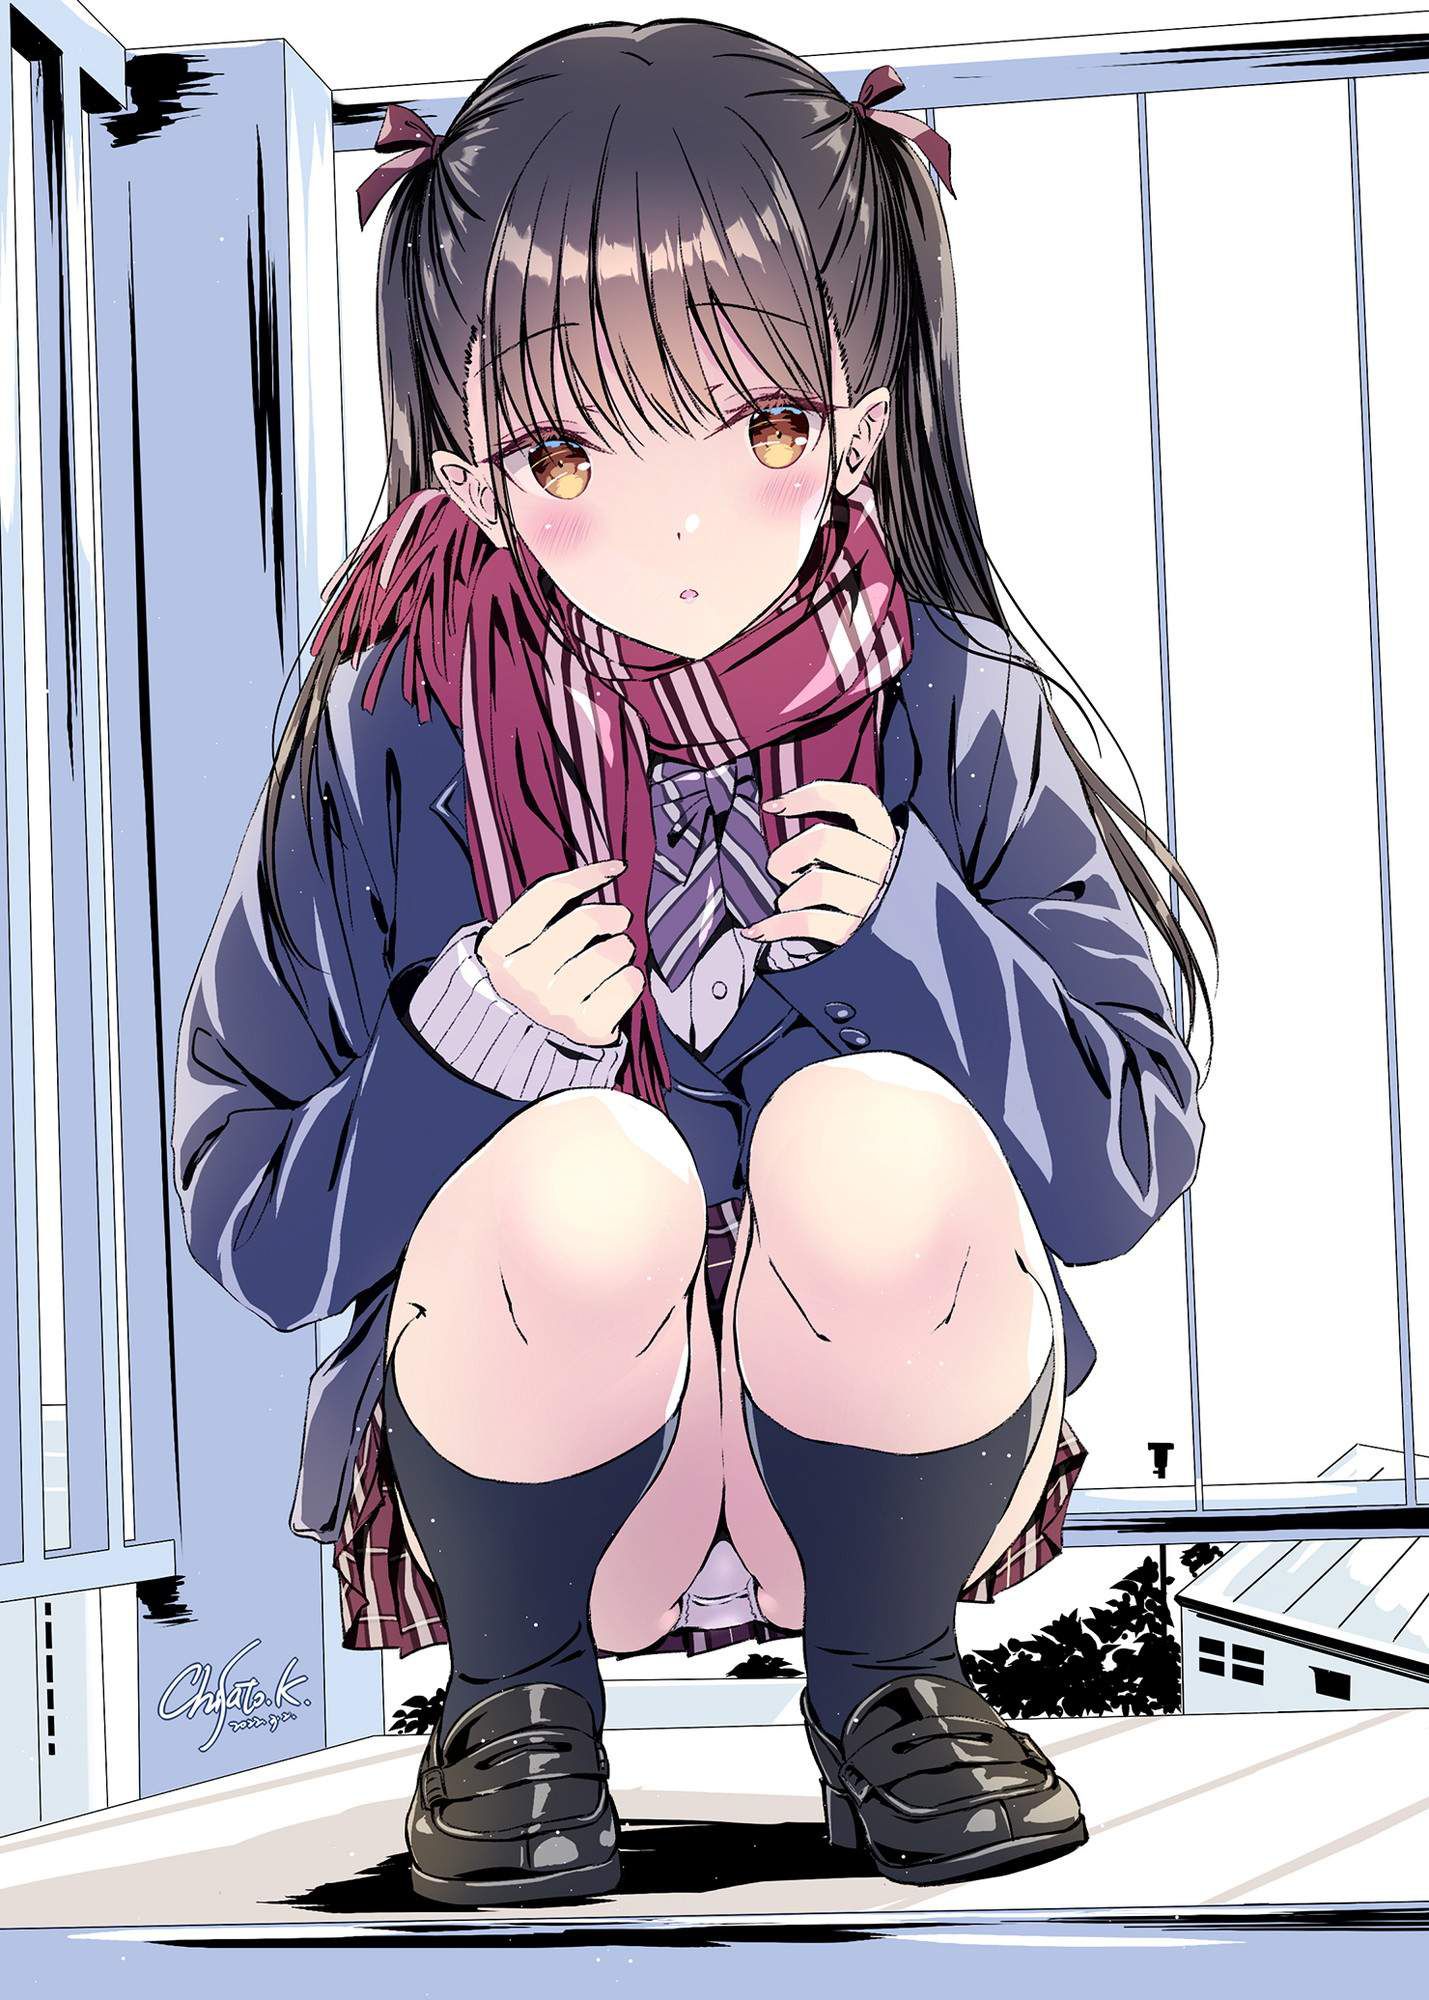 "Where are you looking~?" A soft-looking defenseless crotch image ♪ of a girl squatting with her eyes 17